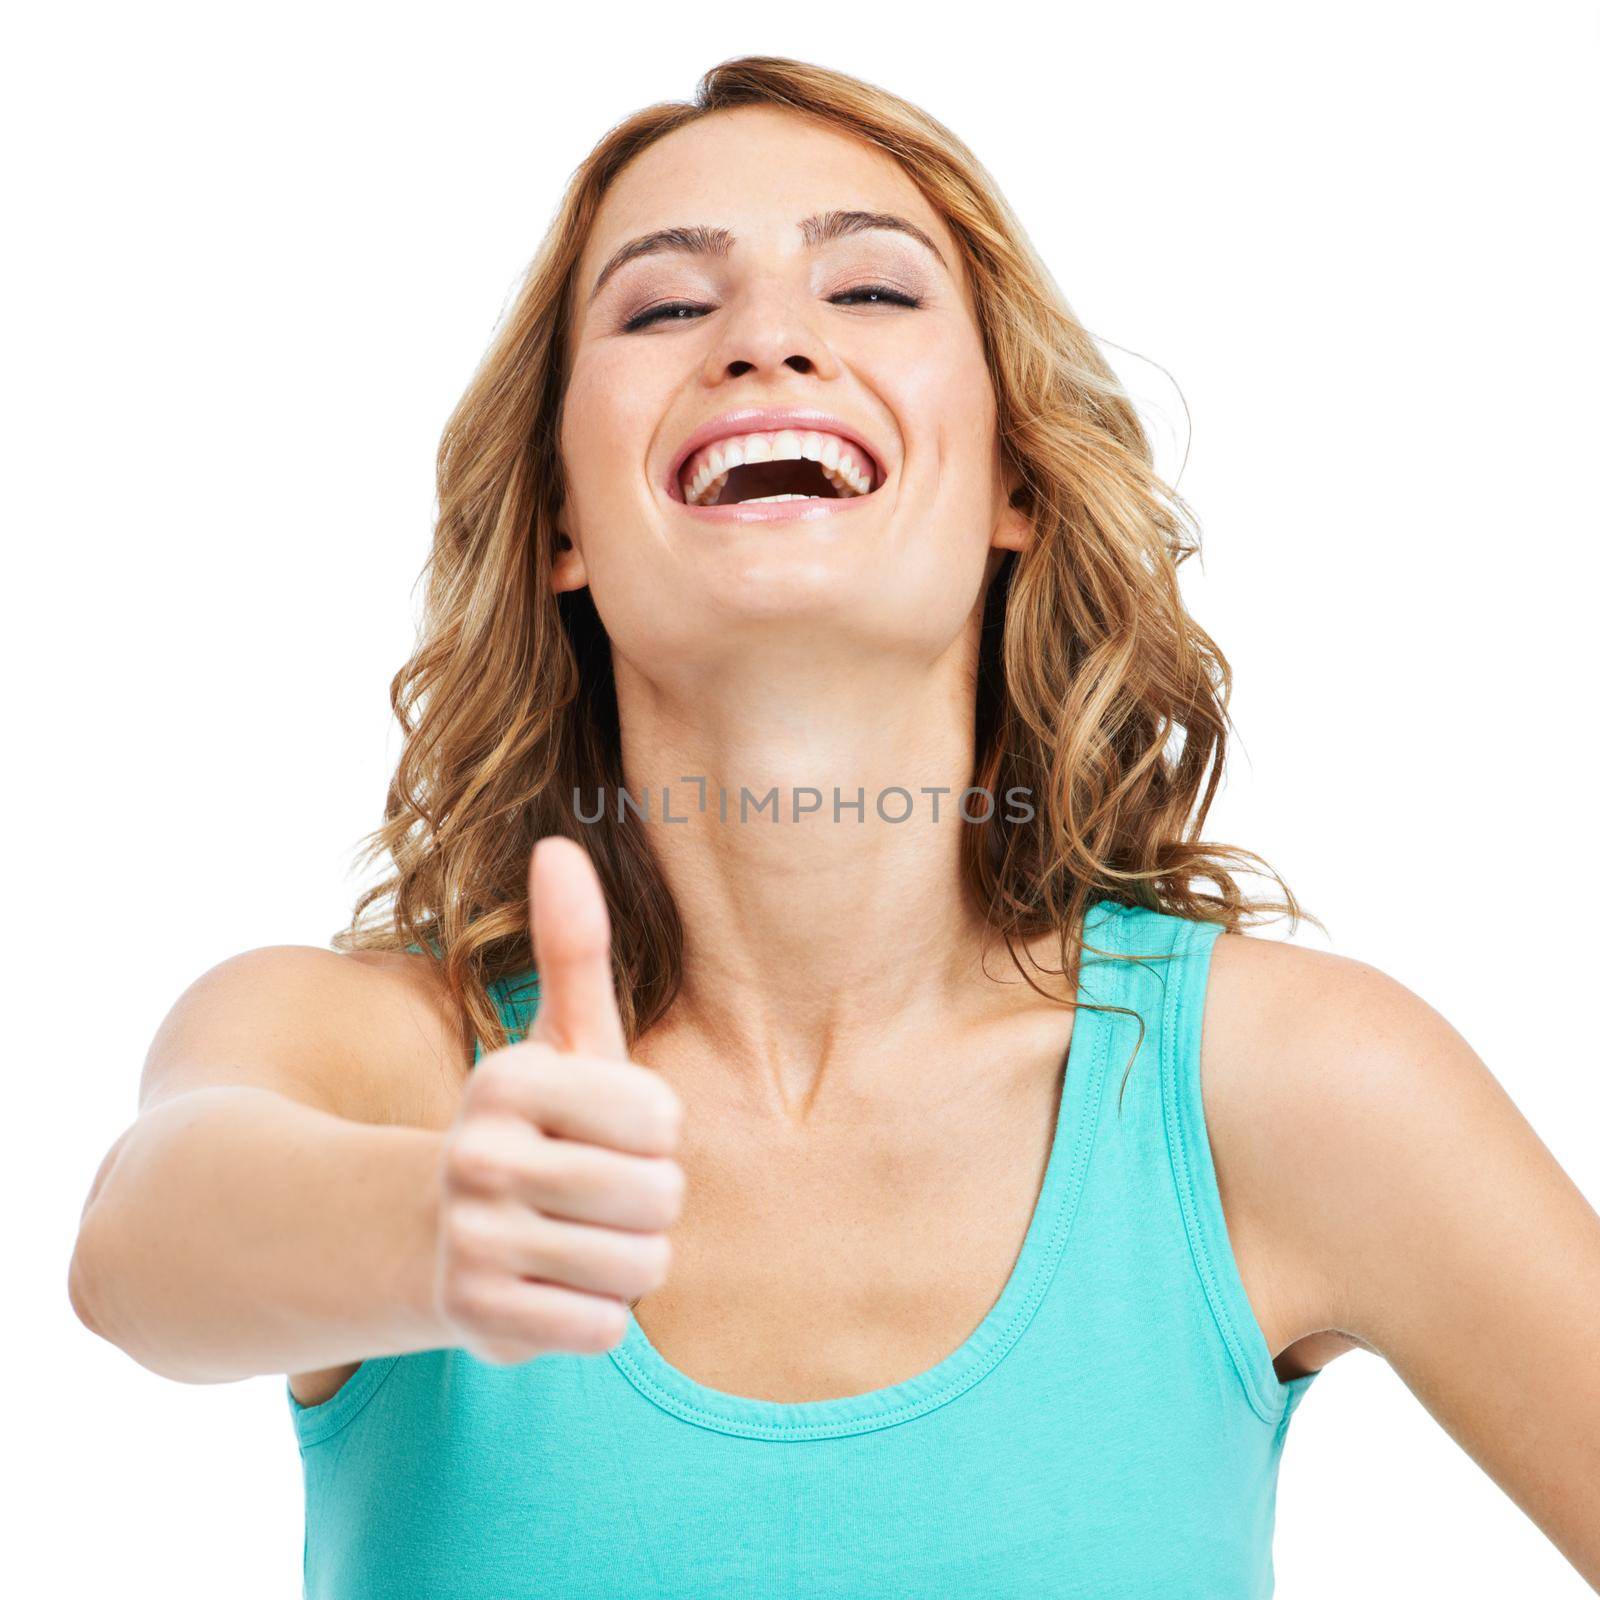 An excited young beauty giving you a thumbsup while isolated on a white background.